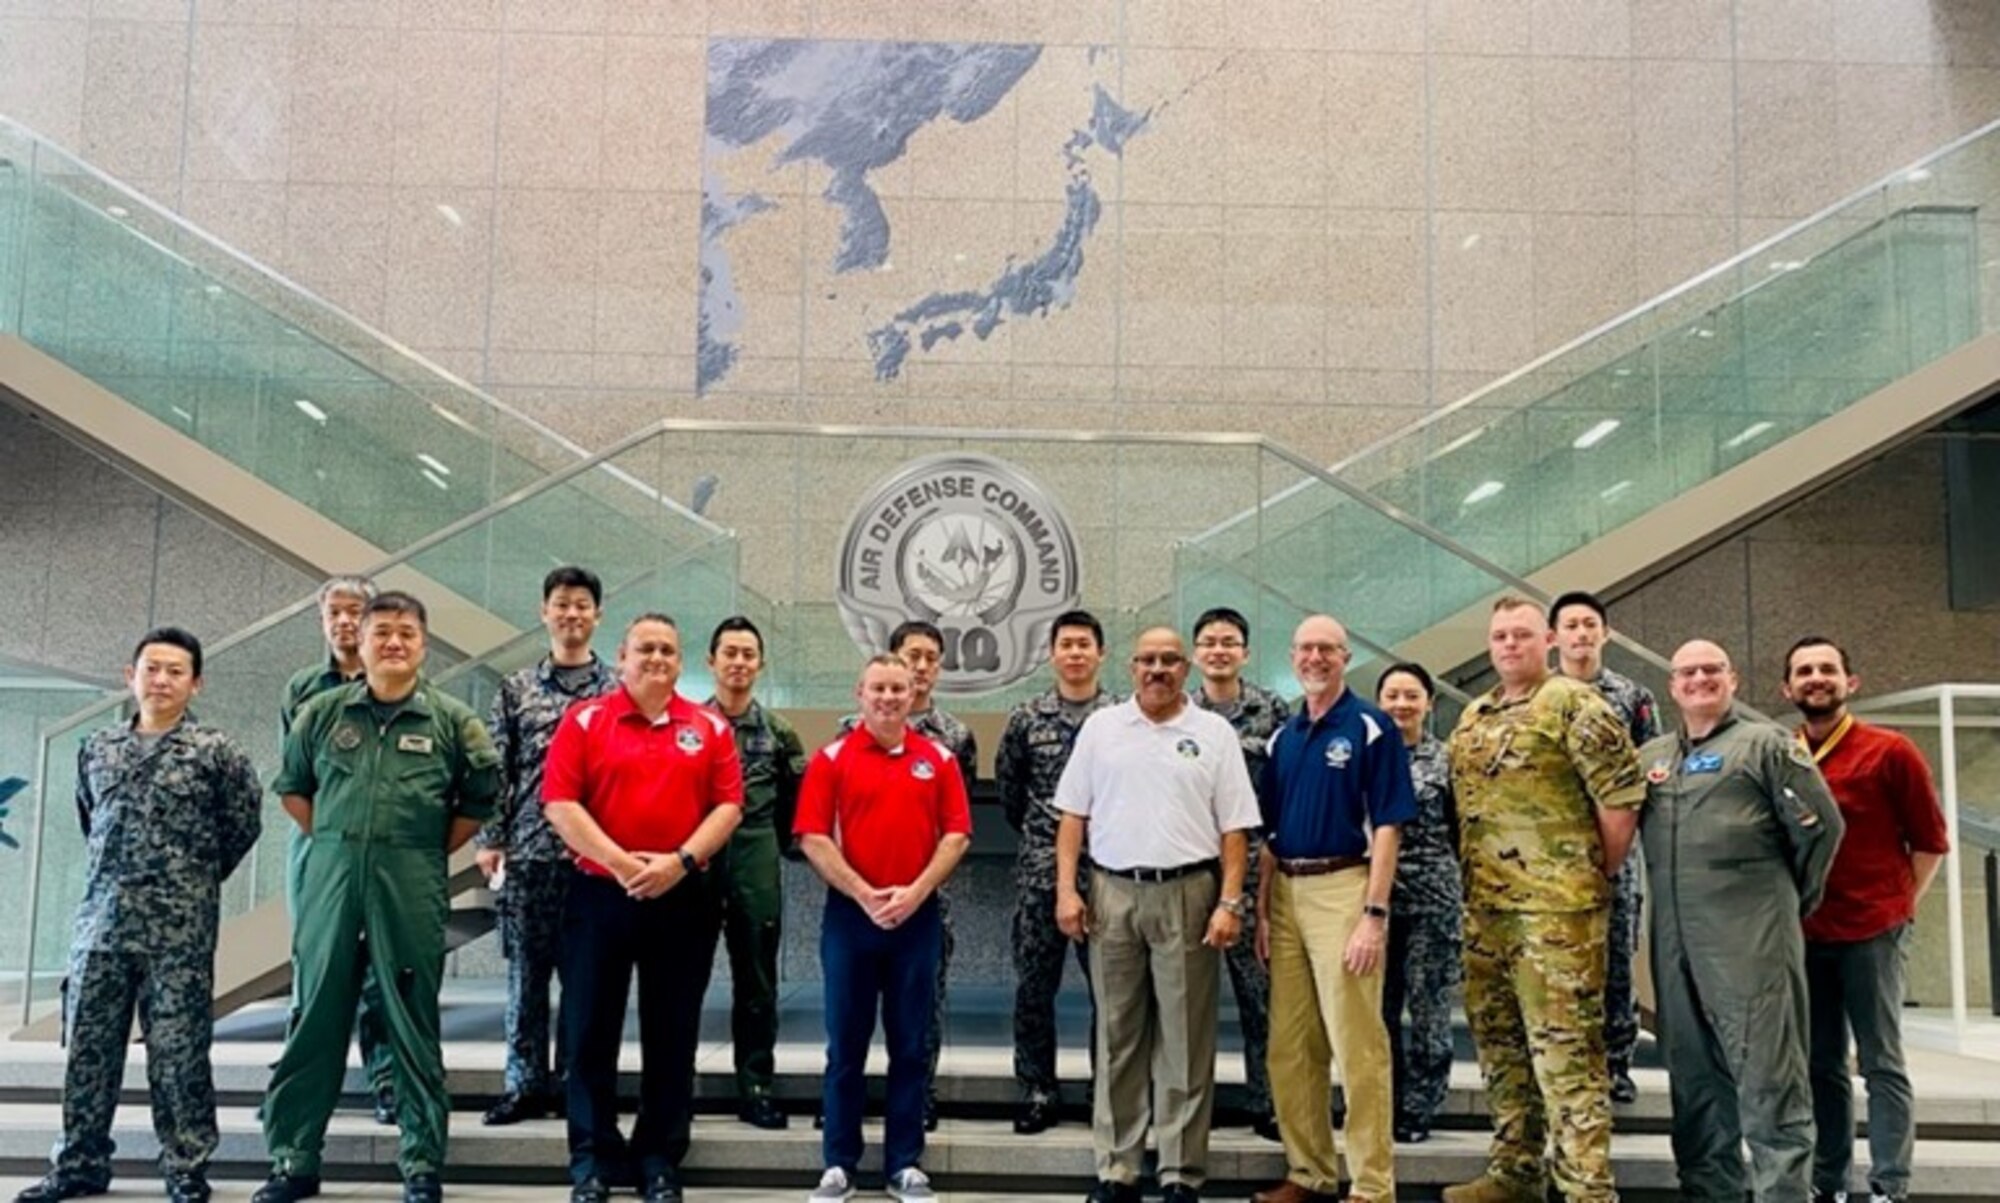 photo of uniformed U.S. Air Force Airmen and Japan air force members, and U.S. Air Force civilians standing in front of glass staircase.